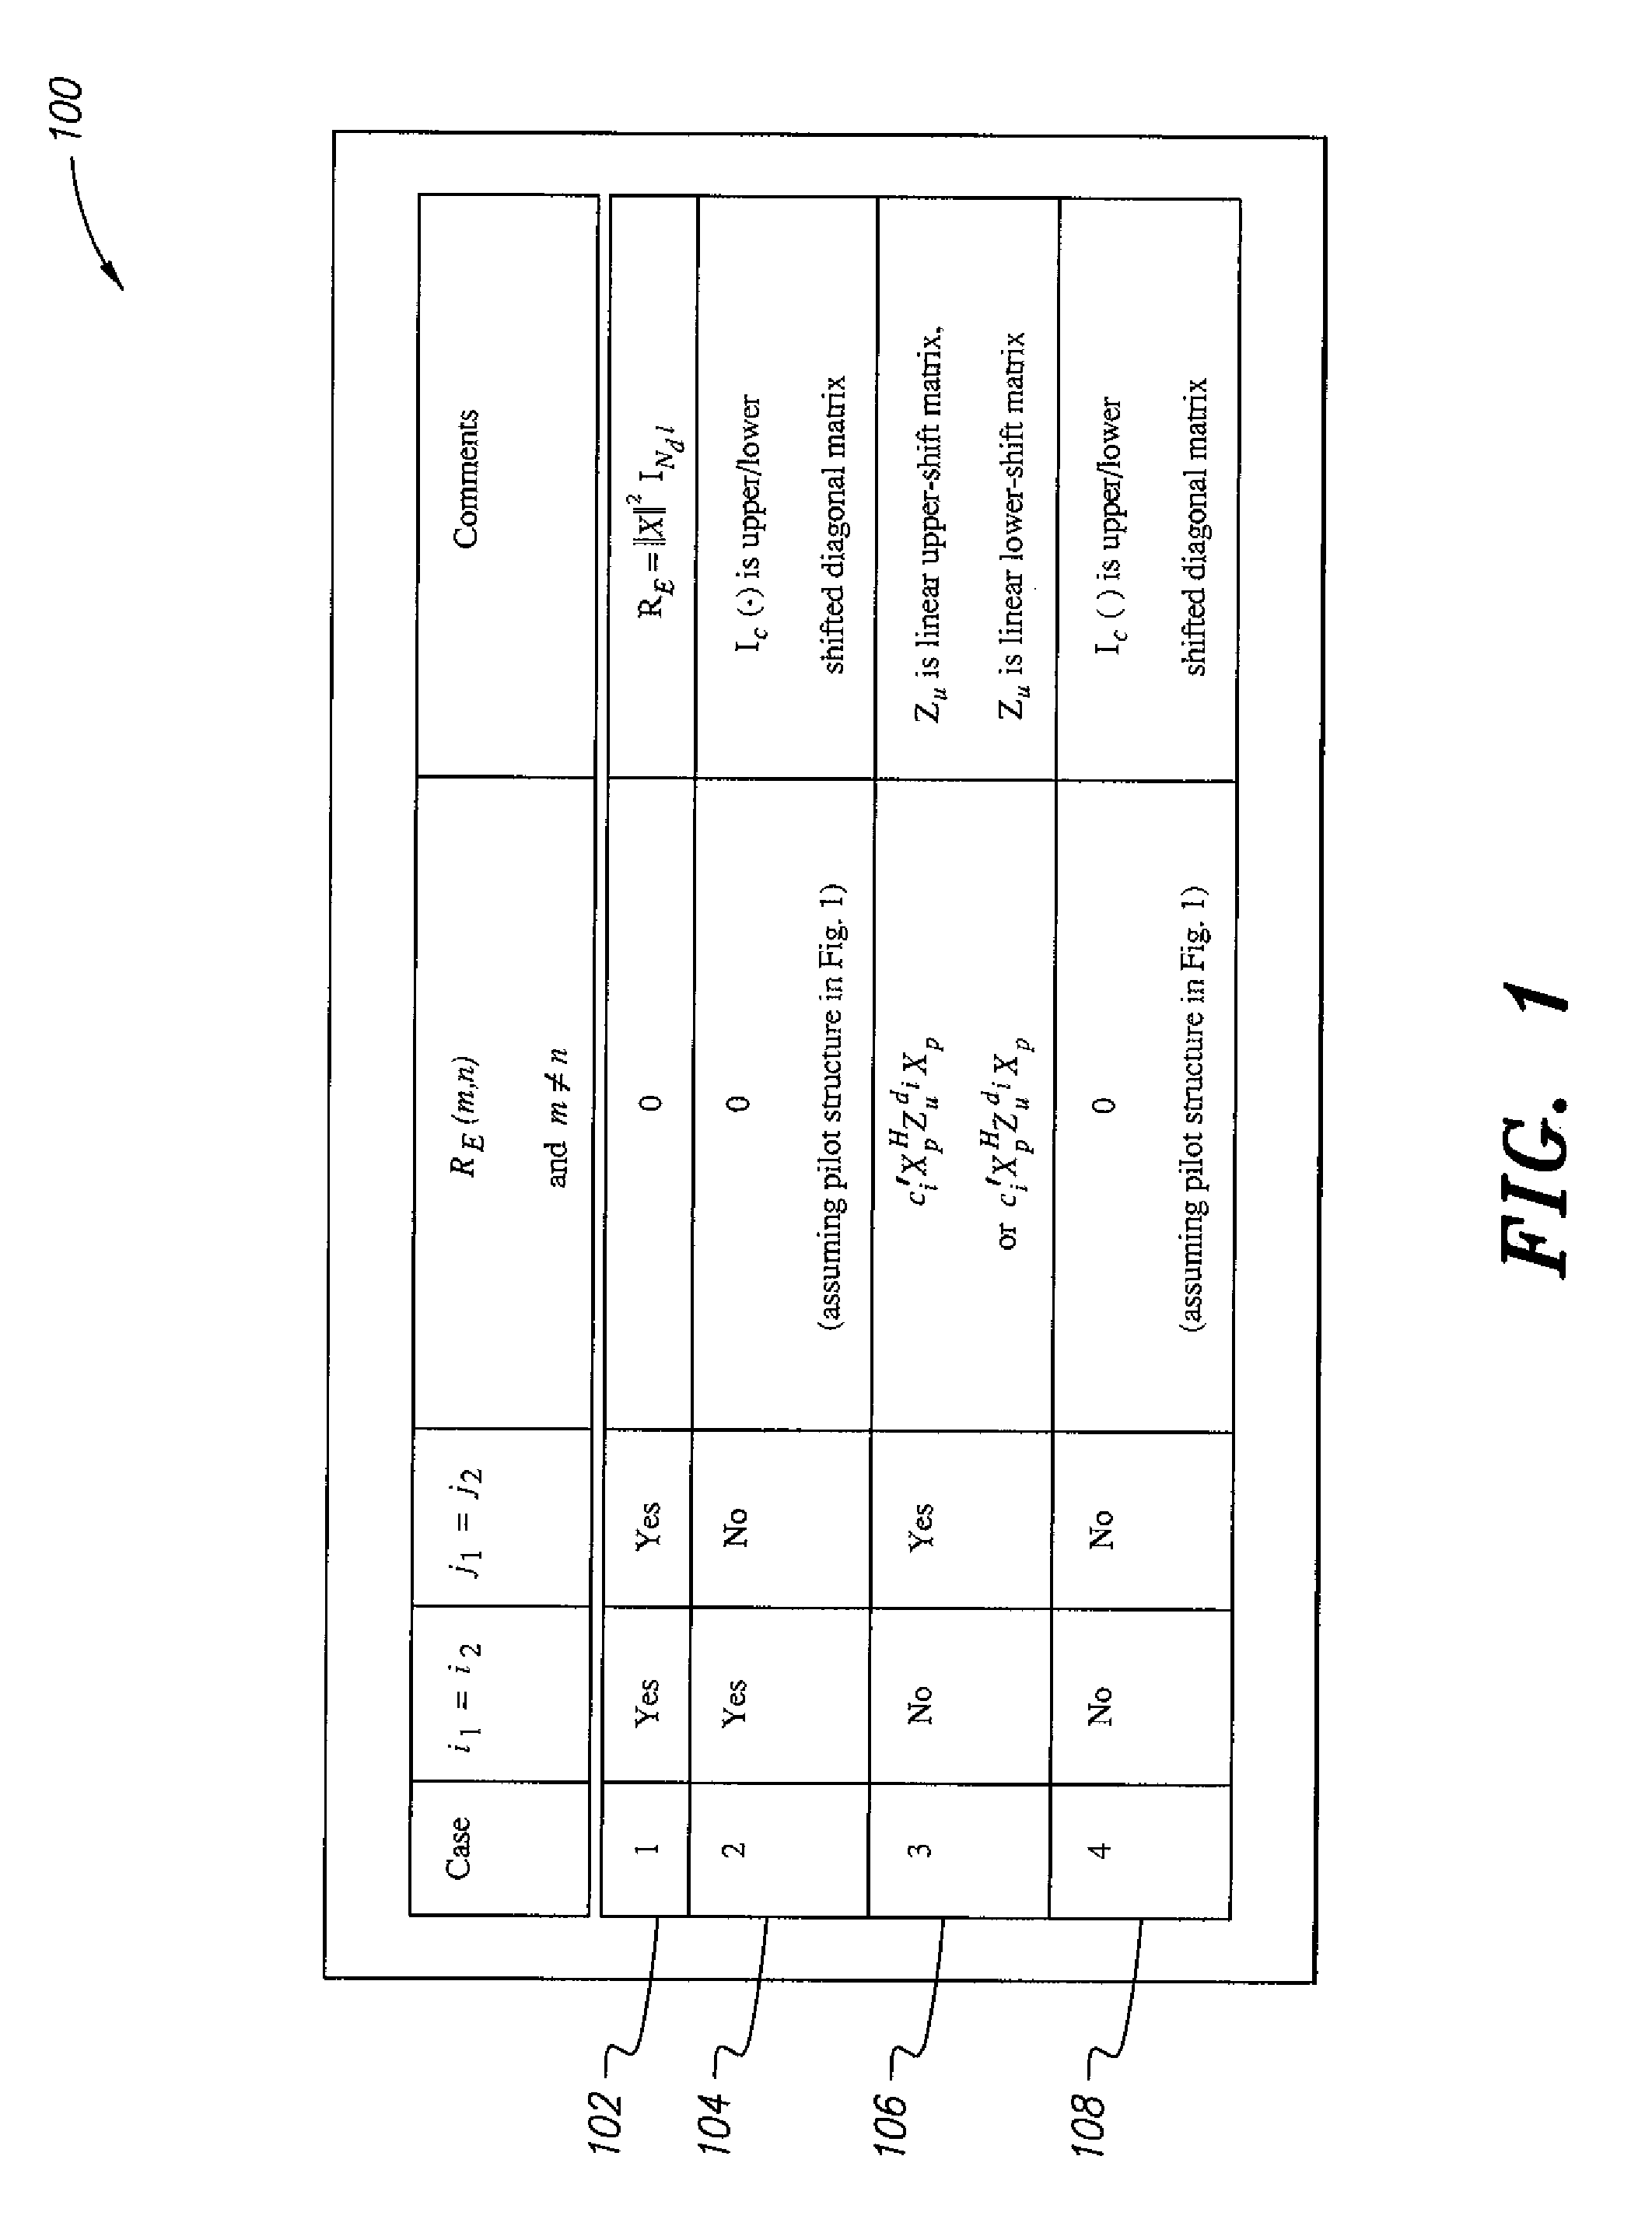 Method for mitigating interference in OFDM communications systems